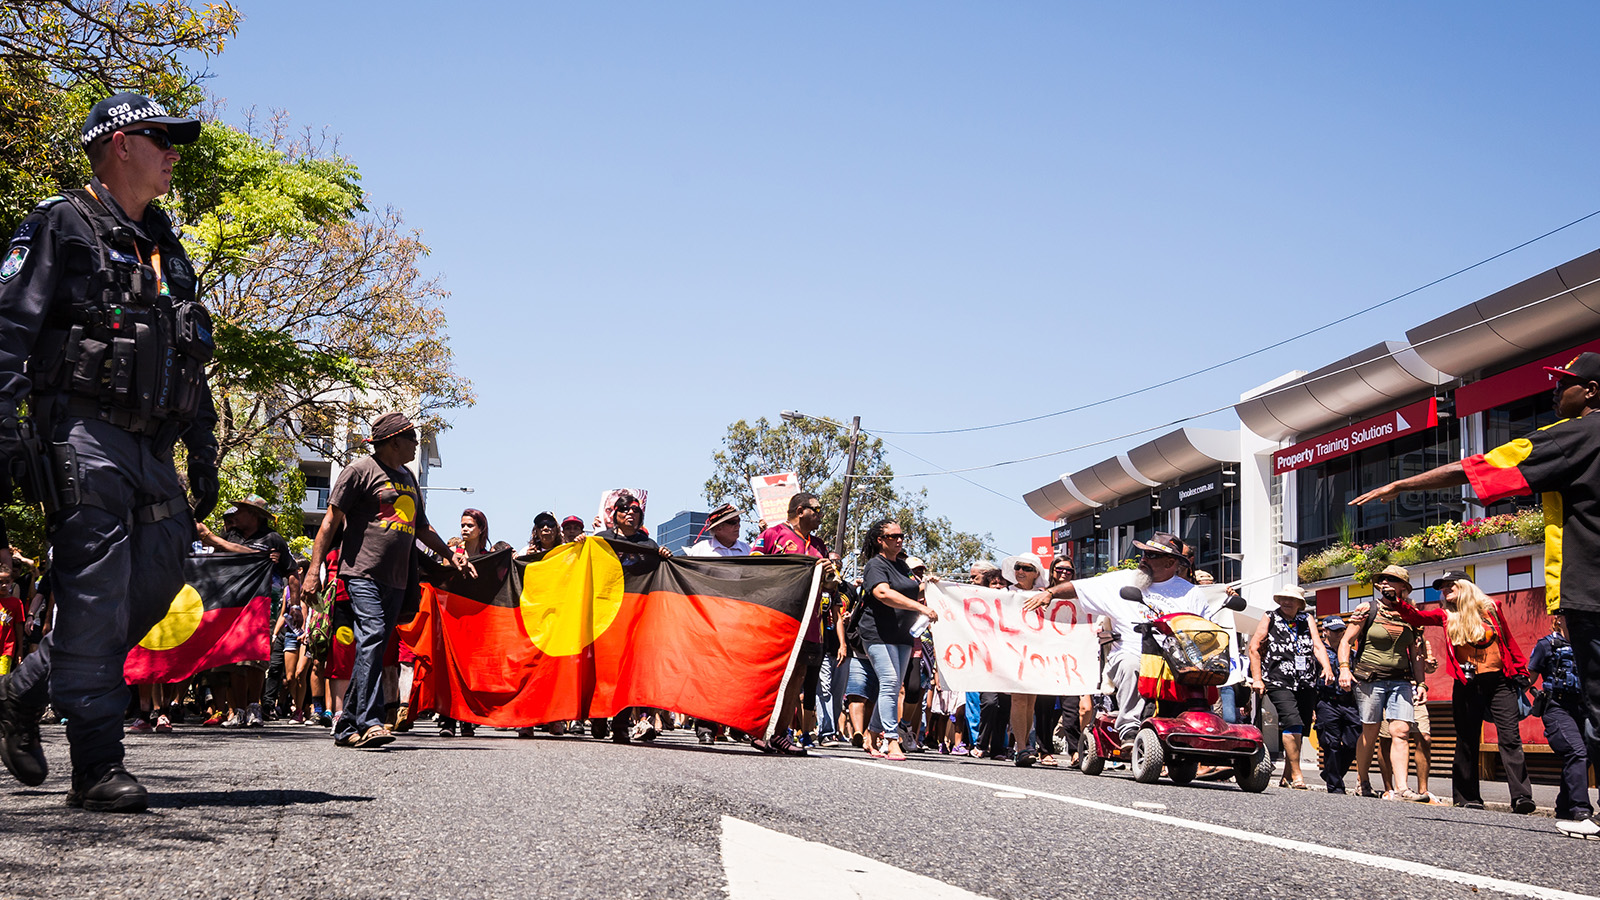 A group of people holding Aboriginal flag protesting on the road.